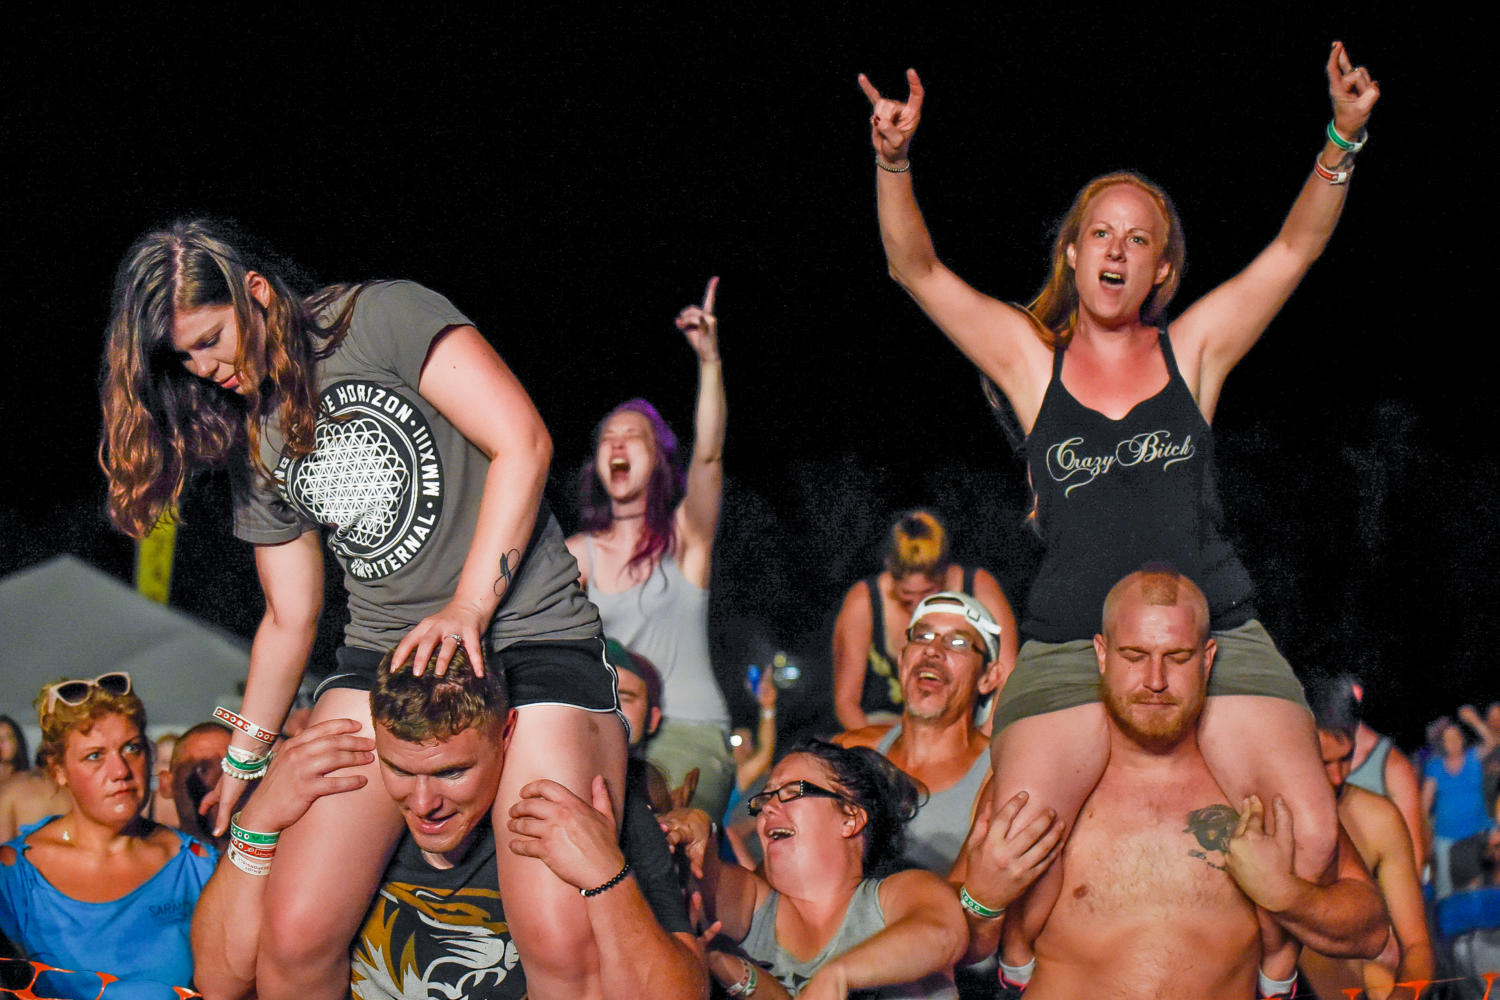 Moonstock festival-goers watch Saliva perform Friday, Aug. 18, 2017, during the music festival at Walker’s Bluff Winery in Carterville. The four-day music festival has already sold upwards of 15,000 tickets for the weekend-long event, will finish with a performance by Ozzy Osbourne during the solar eclipse Monday. (William Cooley | @Wcooley1980)